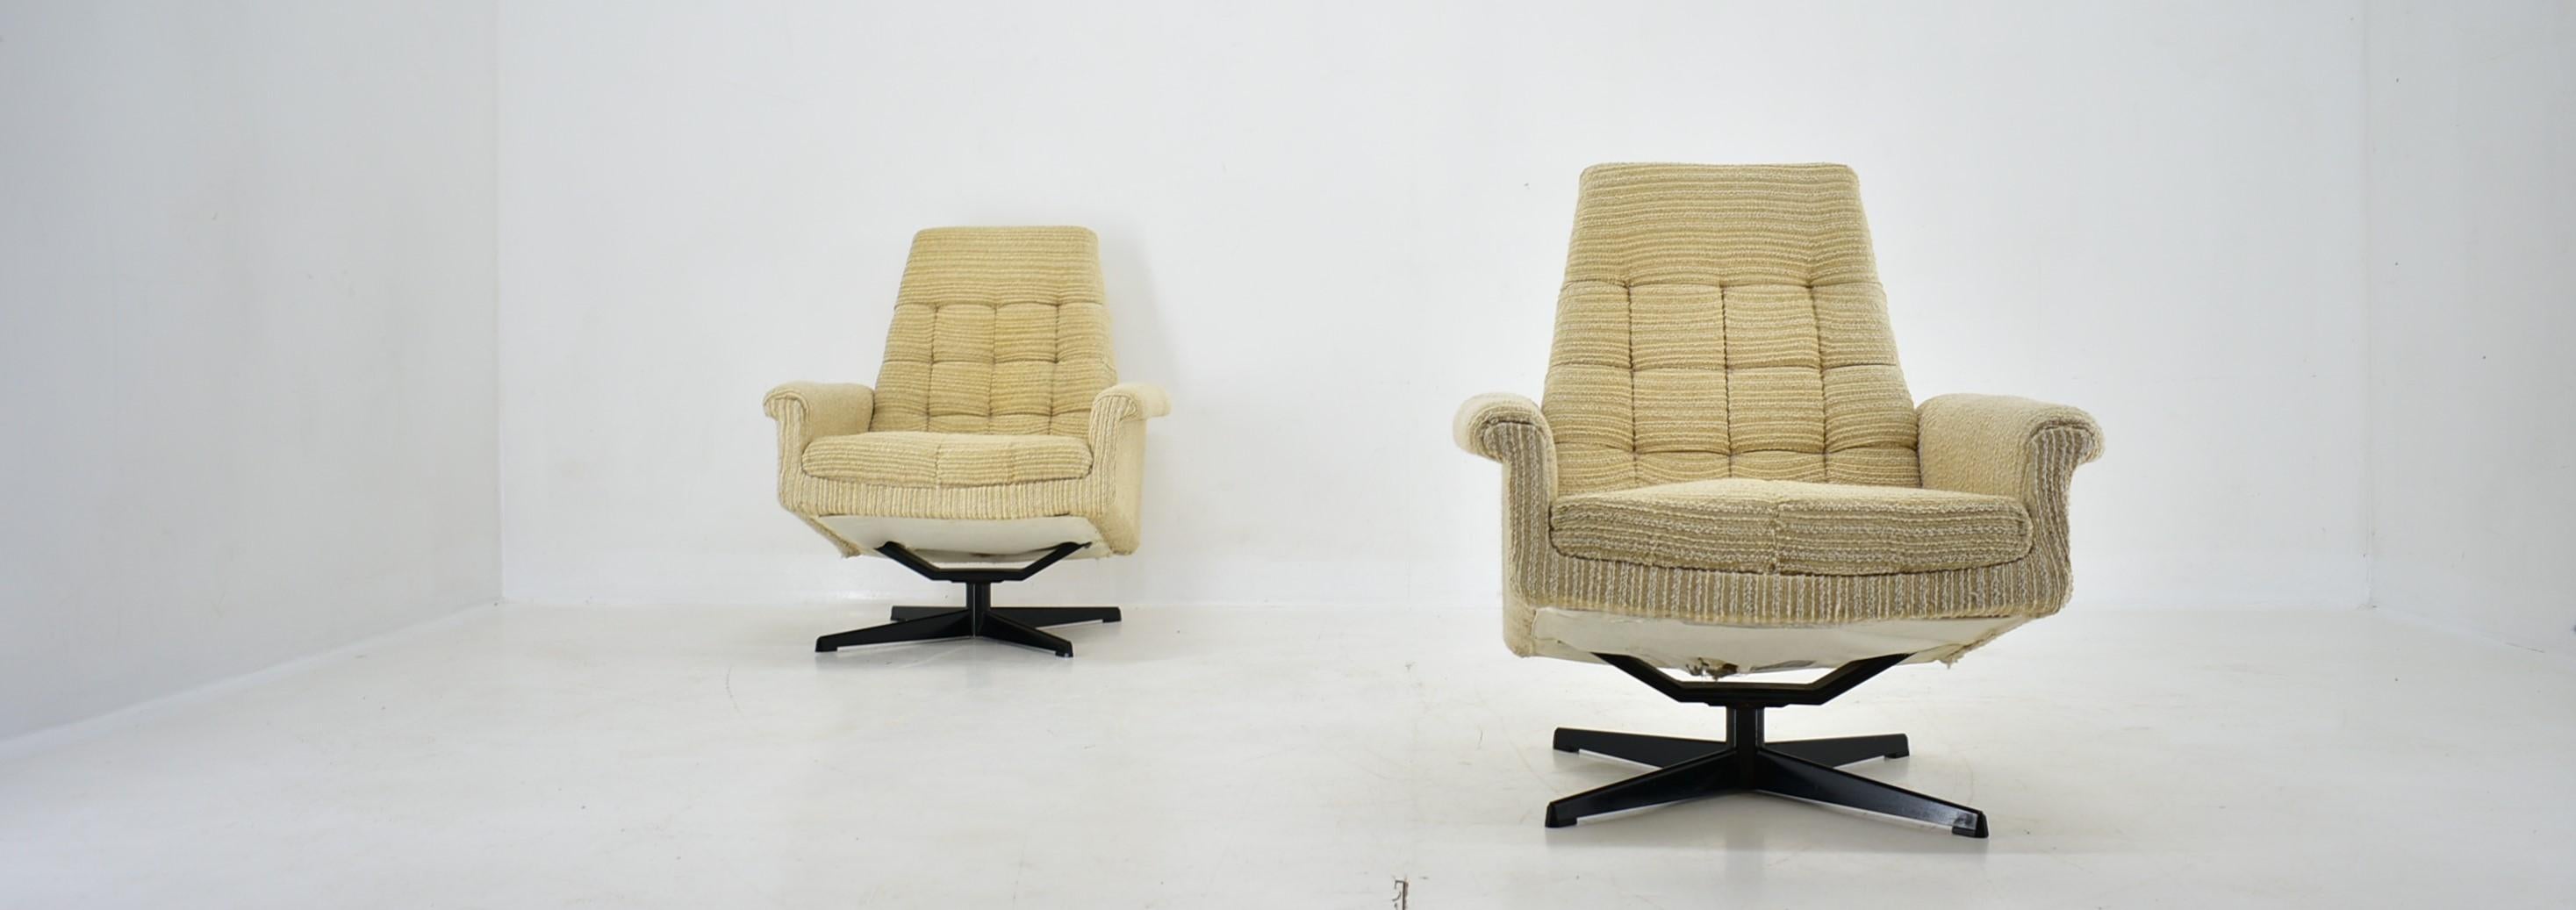 Mid-20th Century Pair of Armchairs, Tabouret by Morávek a Munzar, 1968s For Sale